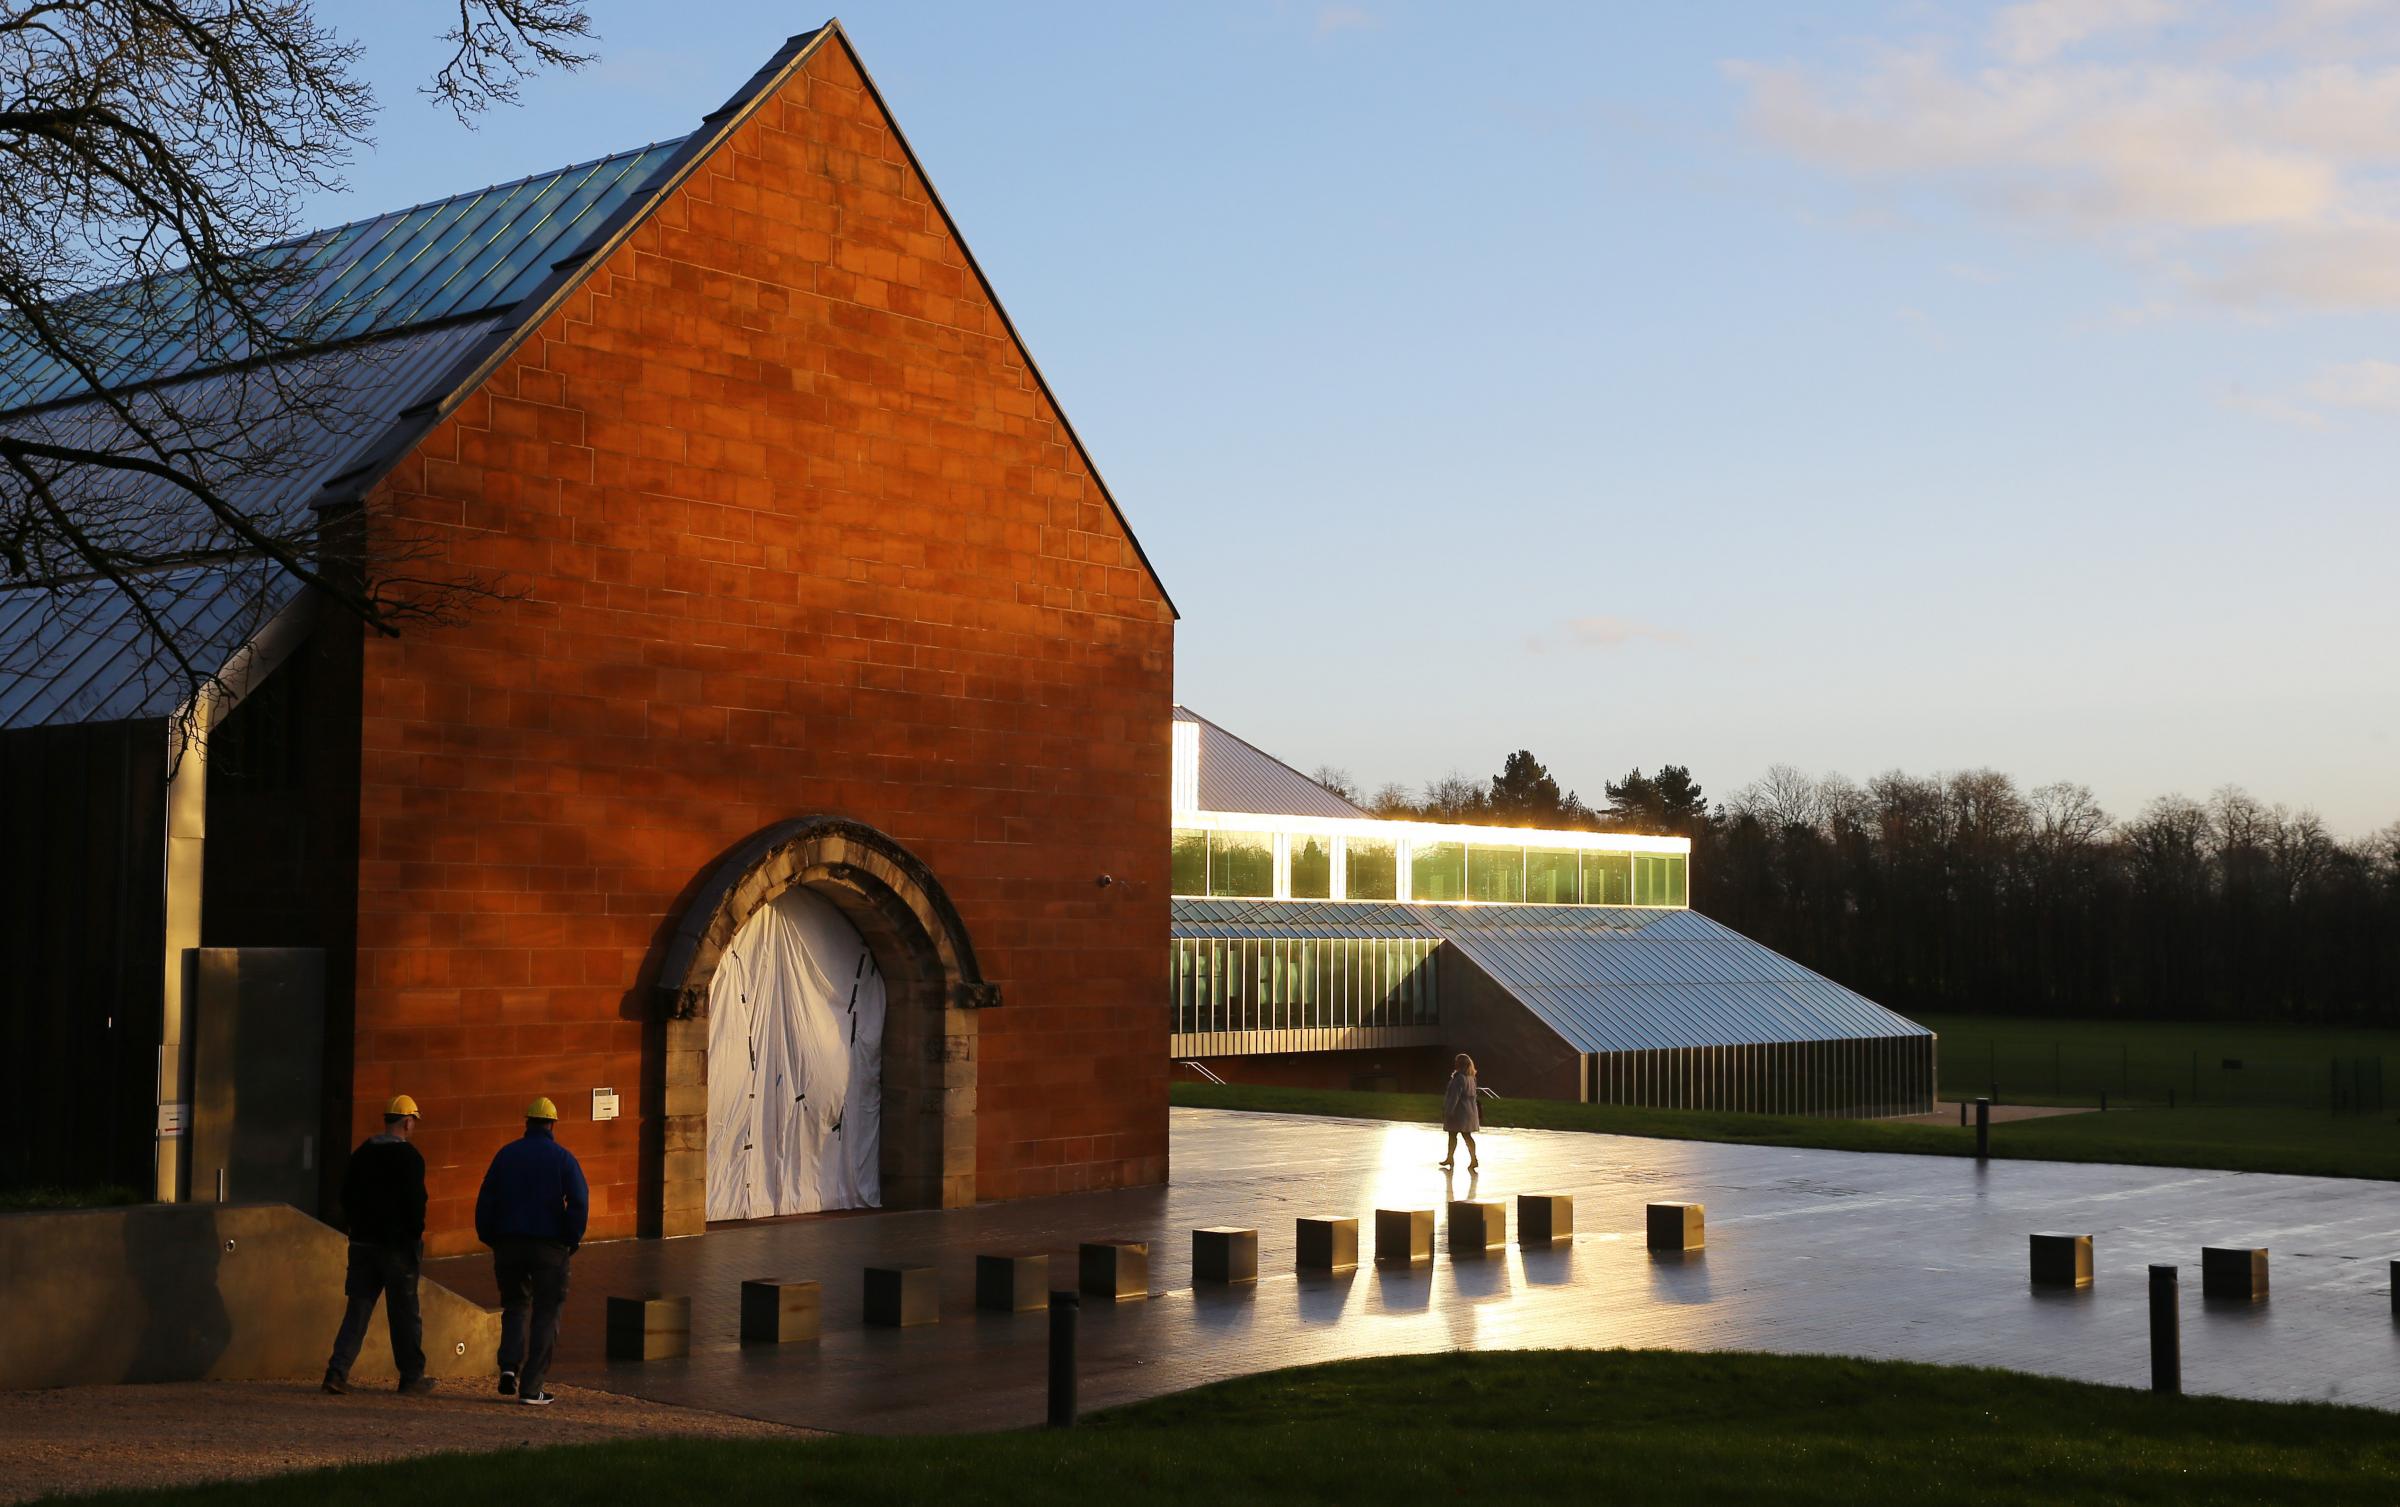 Burrell Collection preview ahead of it reopening to the public next month